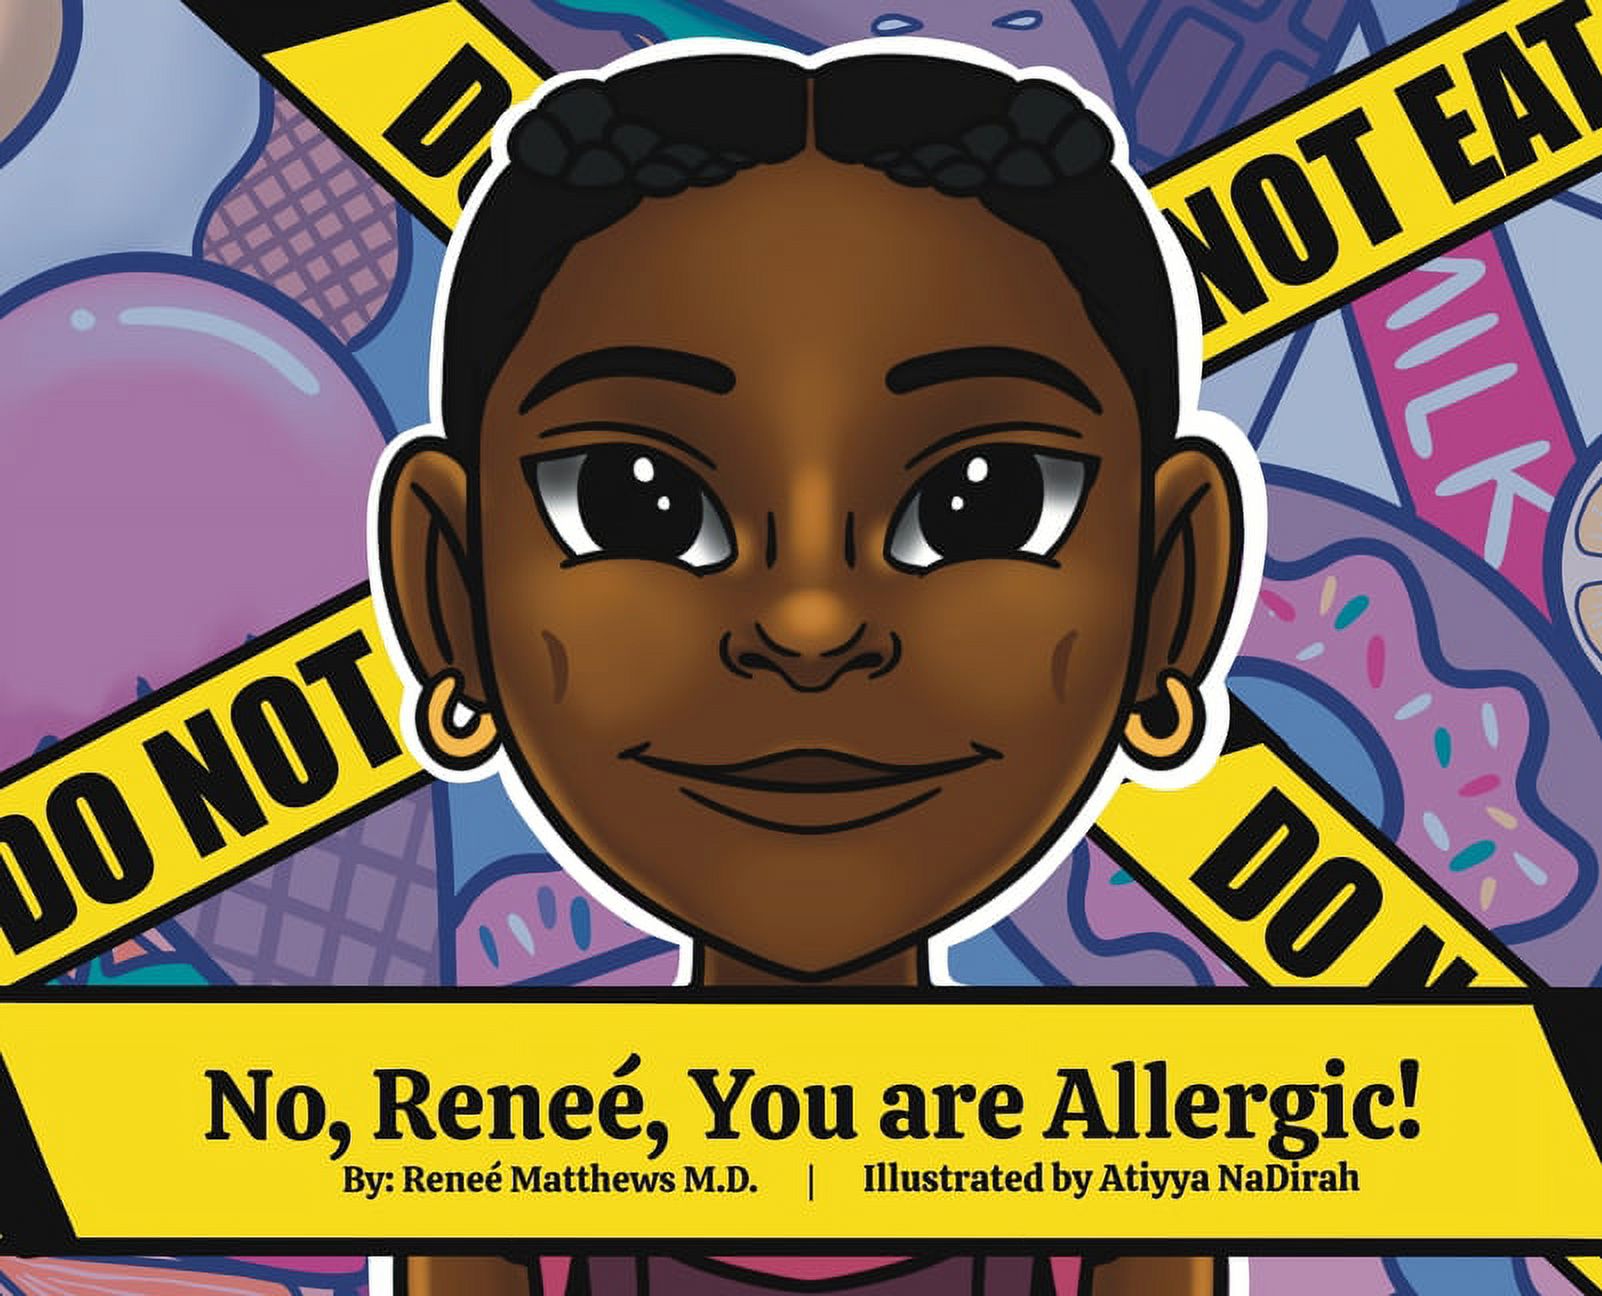 No, Renee, You are Allergic! (Hardcover) - image 1 of 1